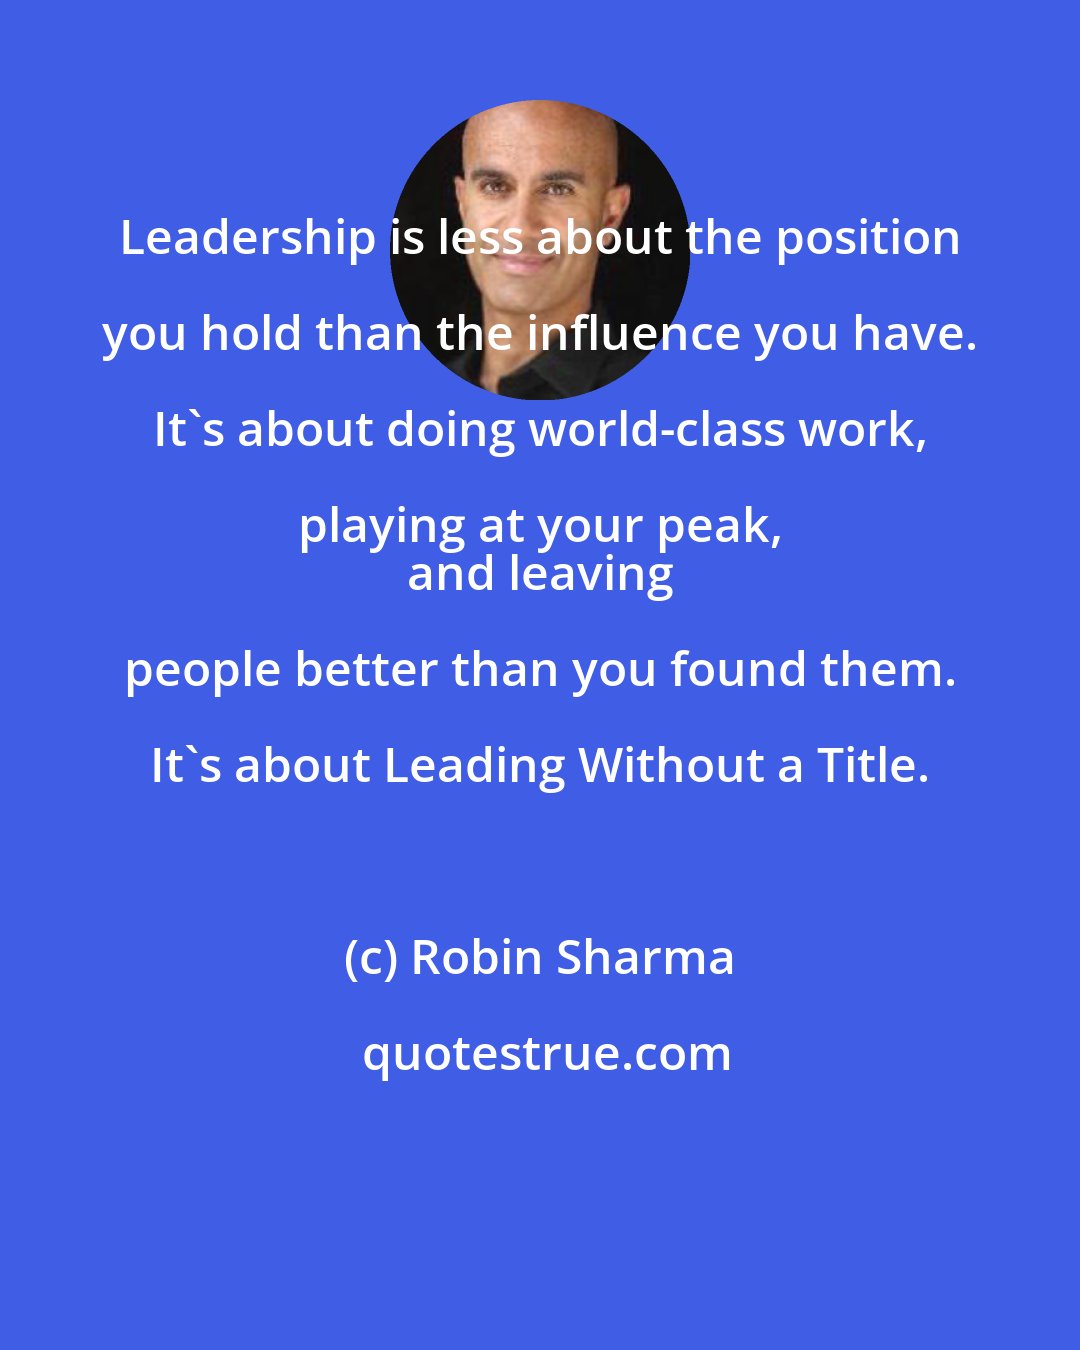 Robin Sharma: Leadership is less about the position you hold than the influence you have. It's about doing world-class work, playing at your peak, 
 and leaving people better than you found them. It's about Leading Without a Title.